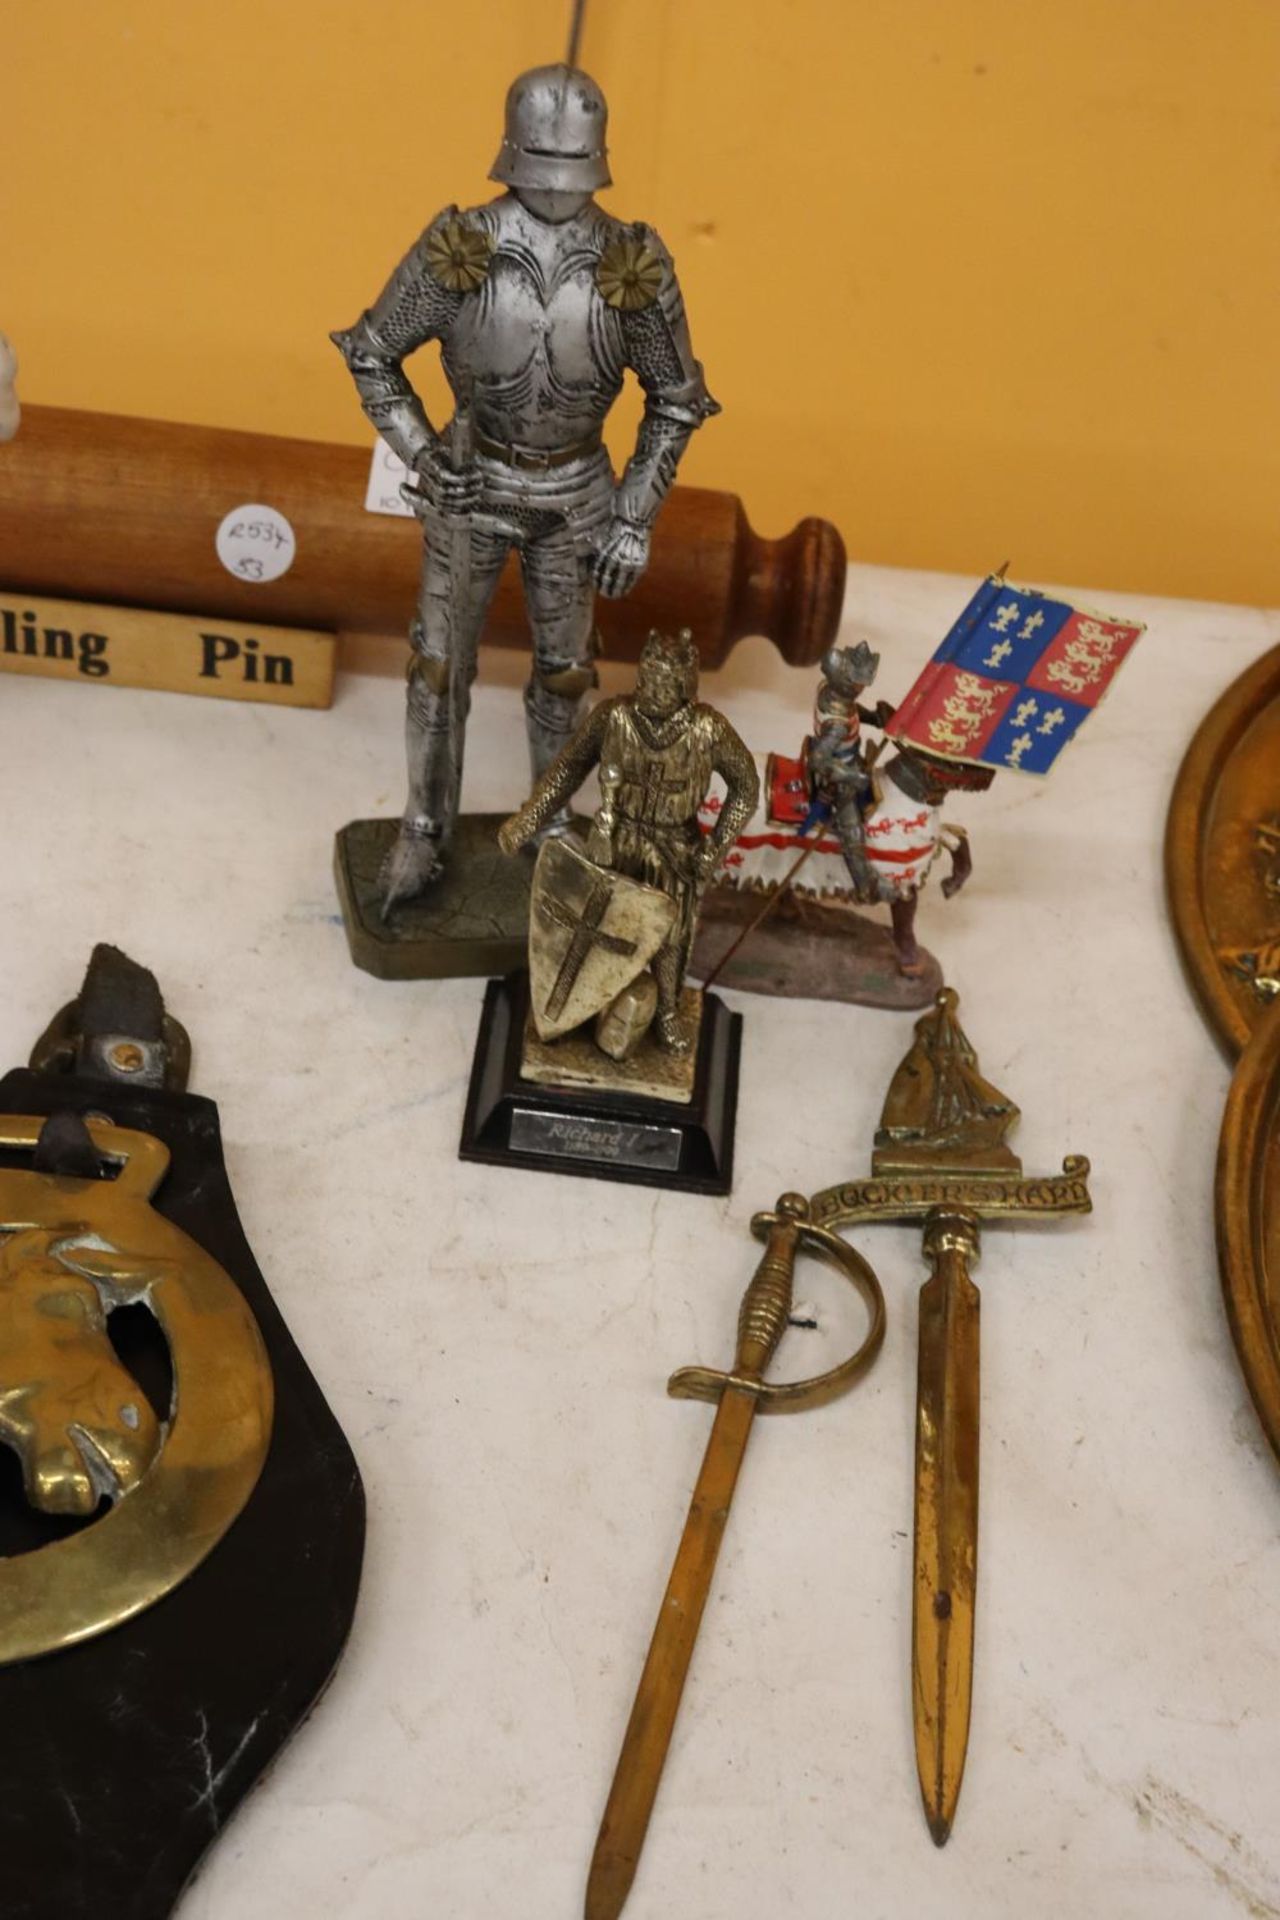 THREE SMALL MODELS OF KNIGHTS PLUS TWO BRASS SWORD LETTER OPENERS